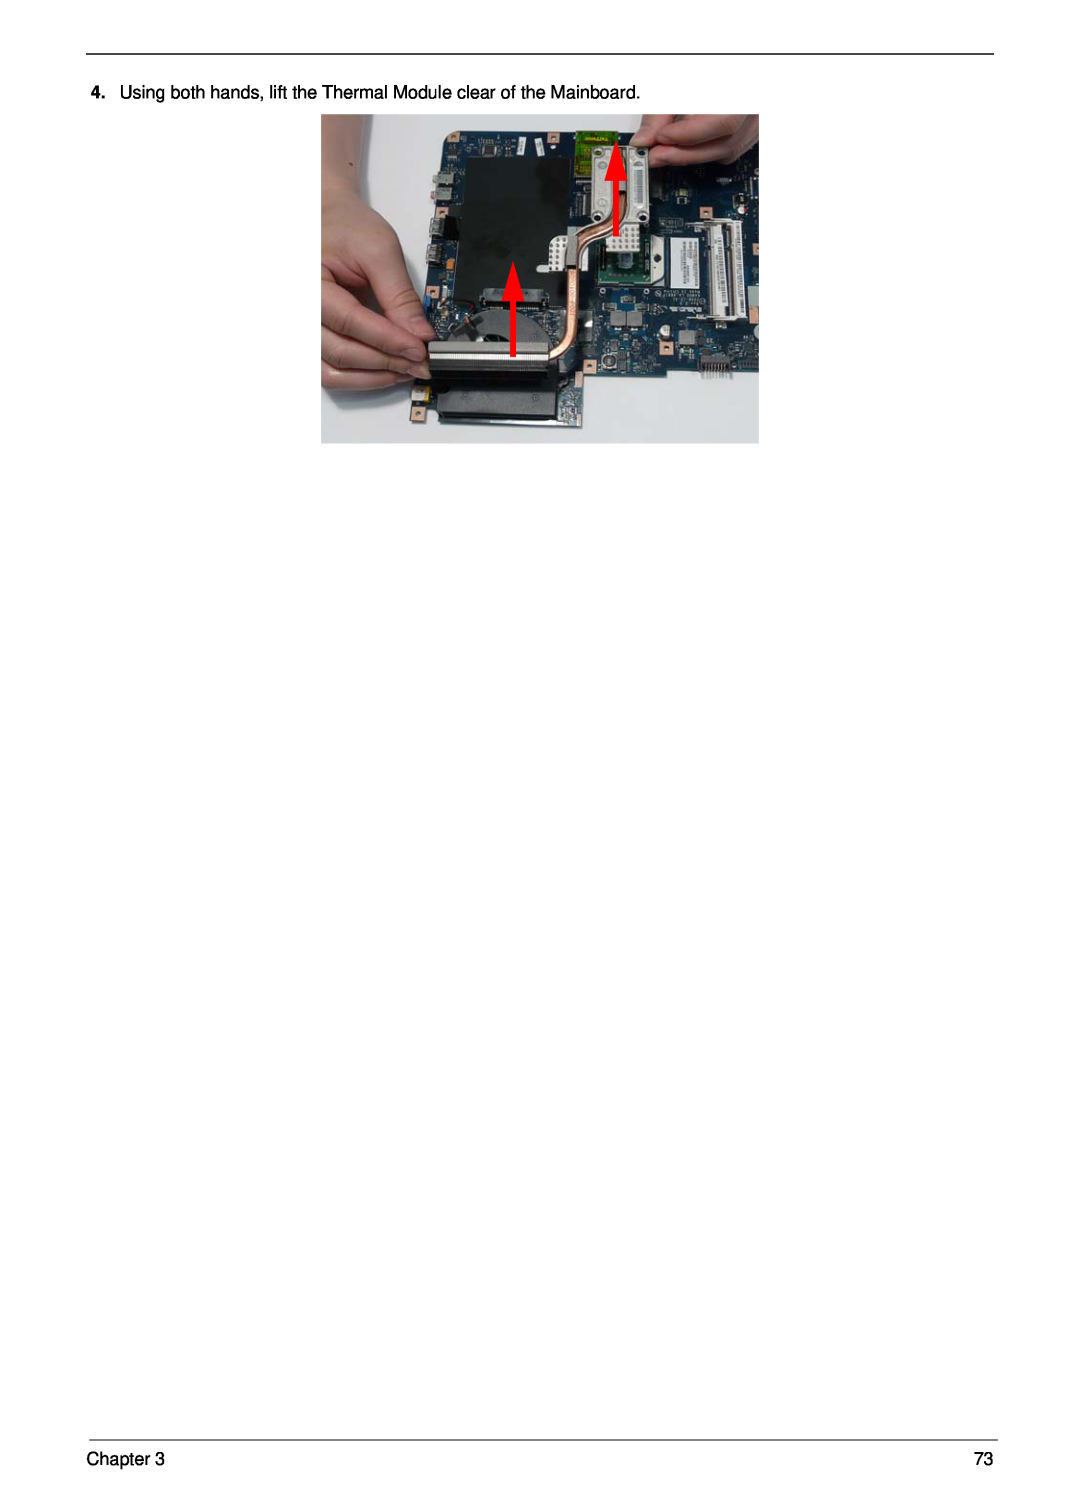 Acer 5532 manual Using both hands, lift the Thermal Module clear of the Mainboard, Chapter 